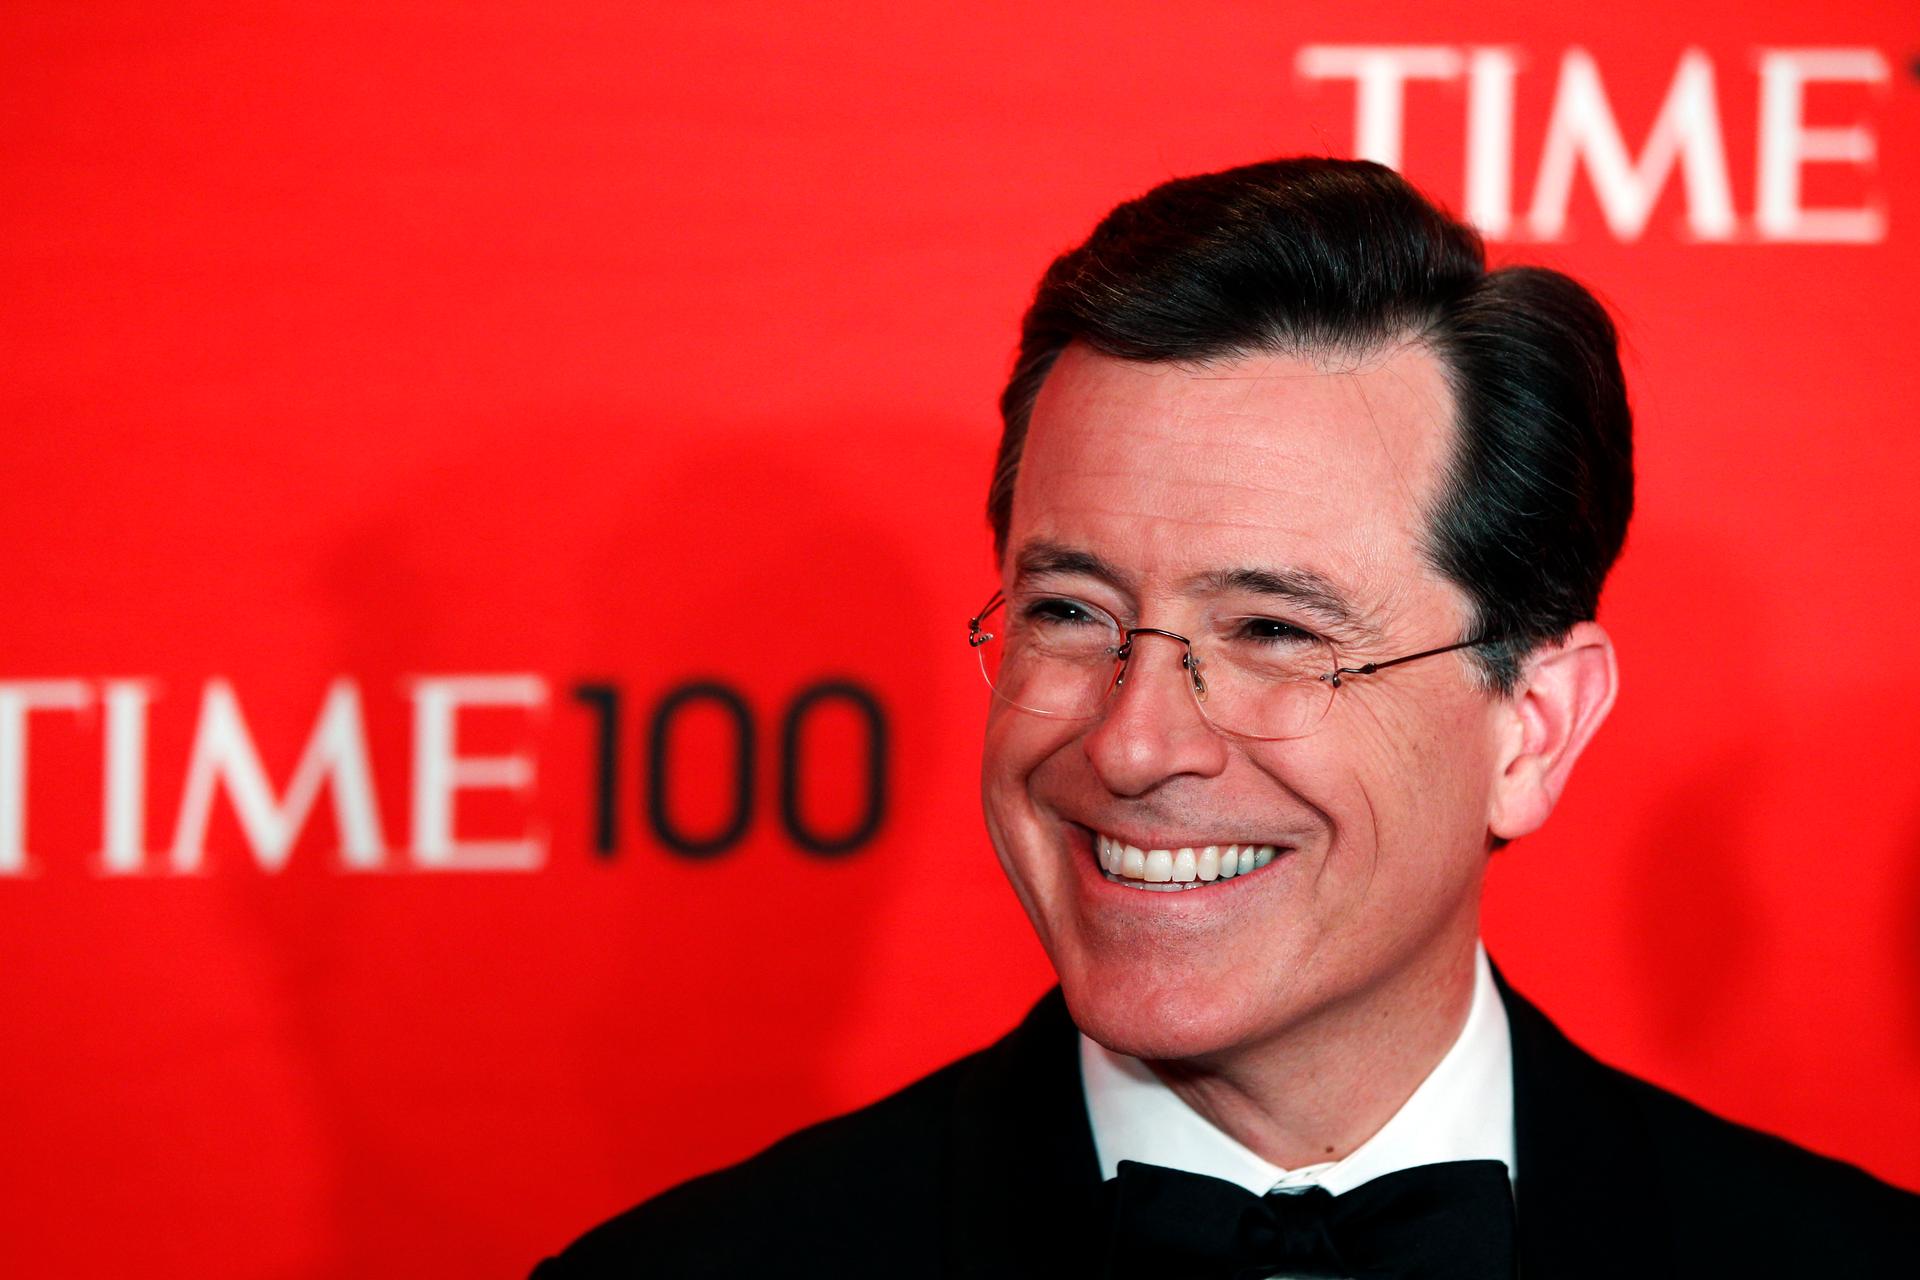 Comedian Stephen Colbert arrives to be honored at the Time 100 Gala in New York, on April 24, 2012.